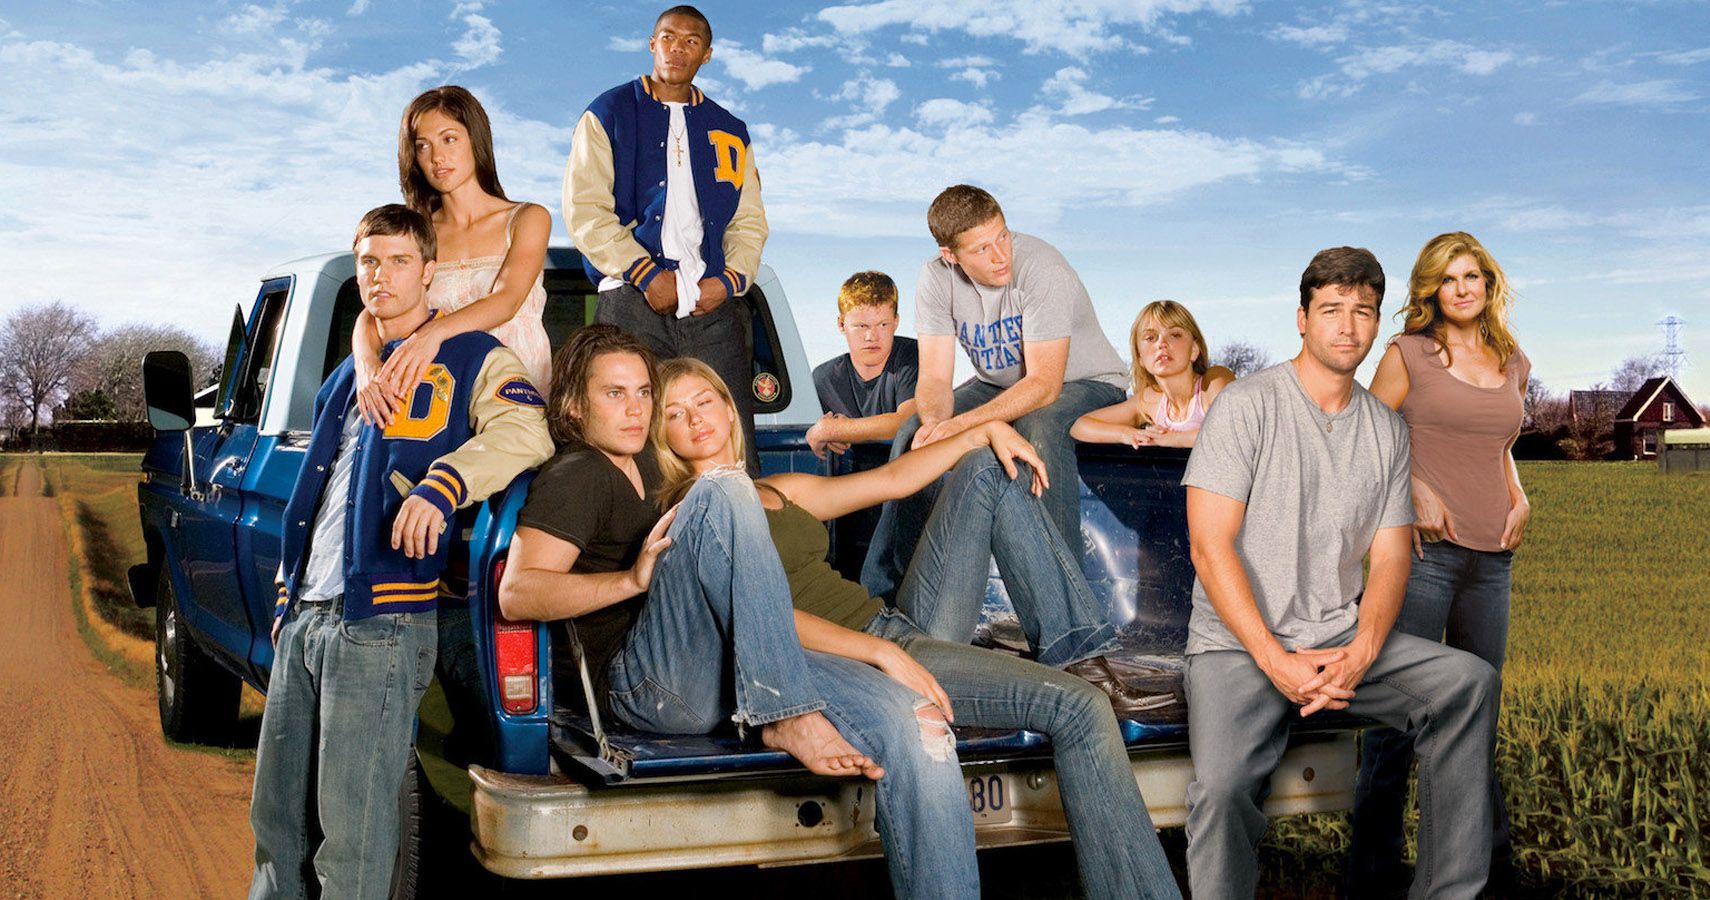 How Many Episodes Are In Friday Night Lights - The 5 Best (& 5 Worst) Episodes of Friday Night Lights According To IMDb